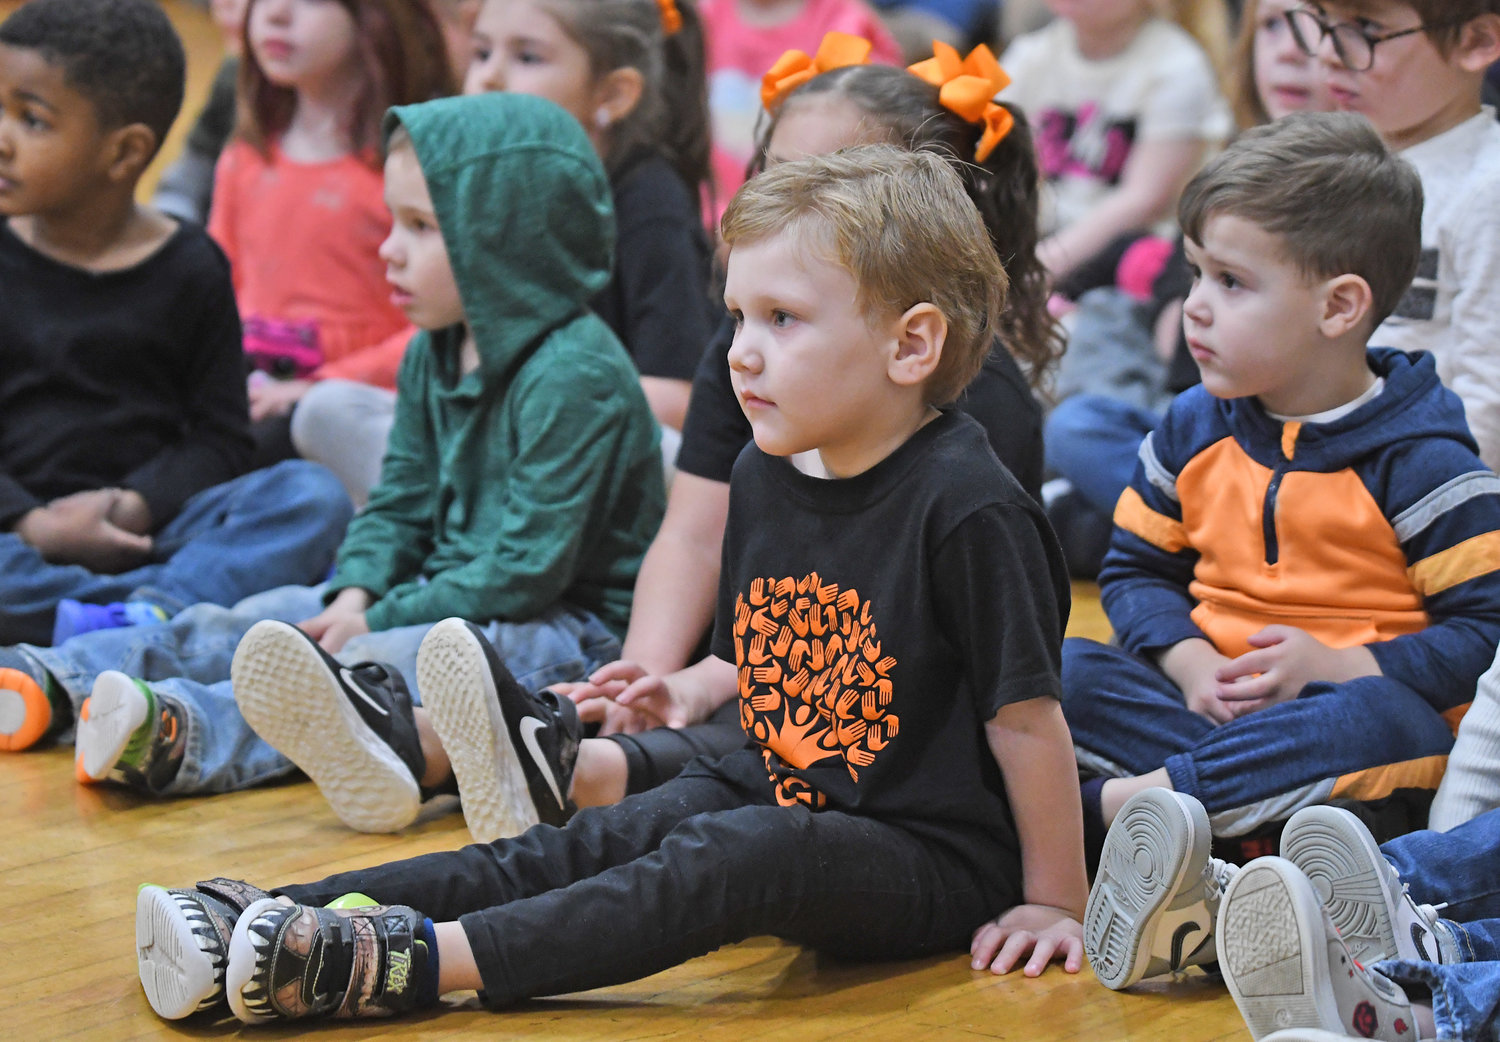 Pre-K students listen to the Rome Free Academy Rhapsody Show Choir's performance Friday, Jan. 13 at Clough School in Rome.